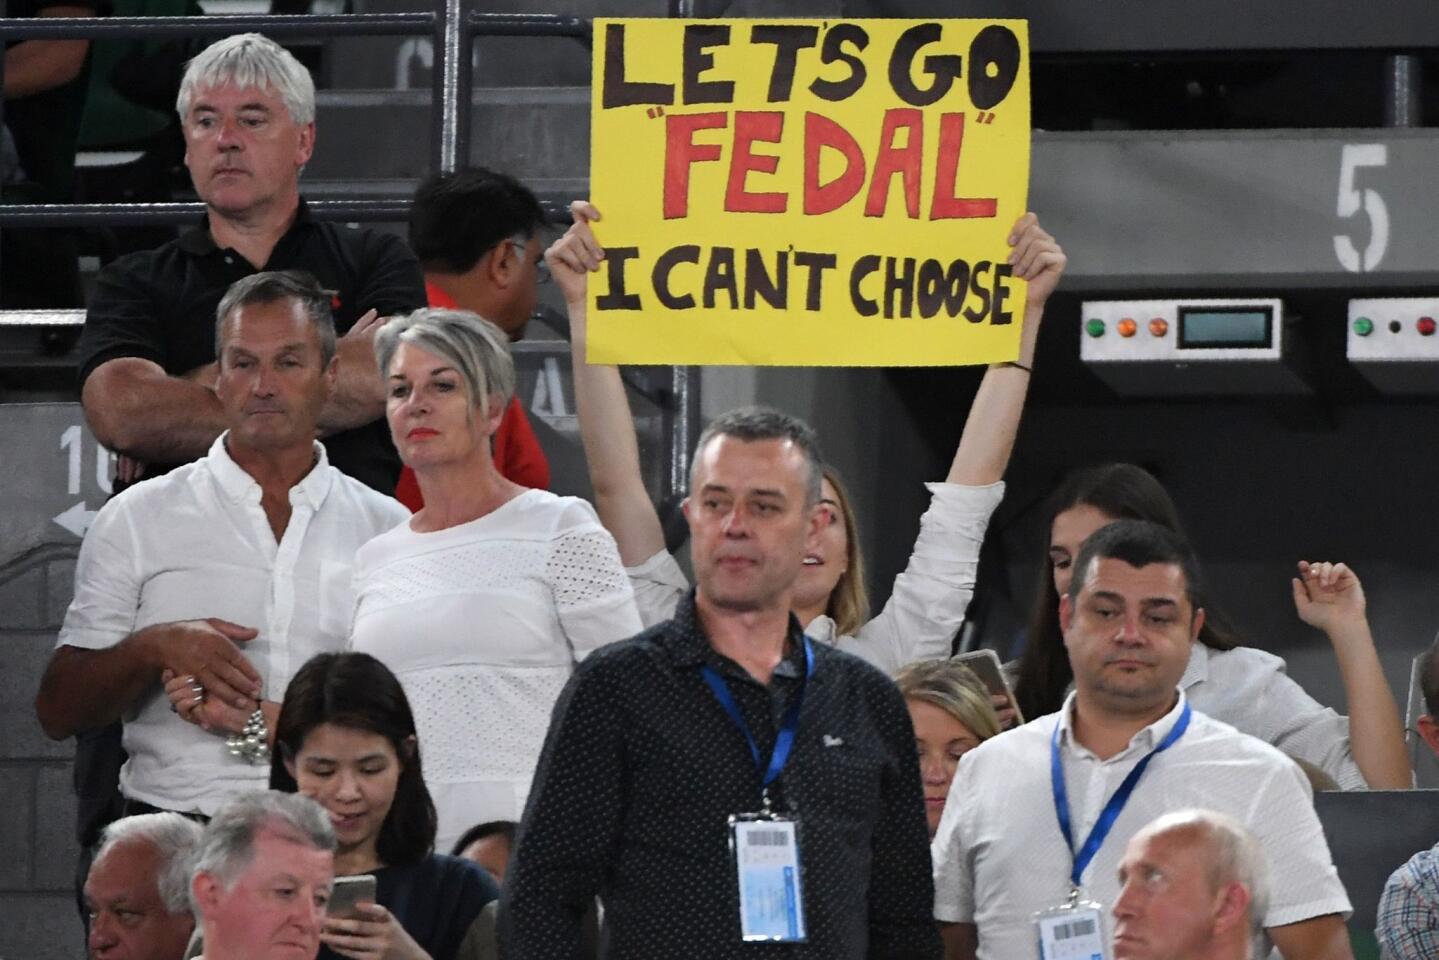 Fedal sign